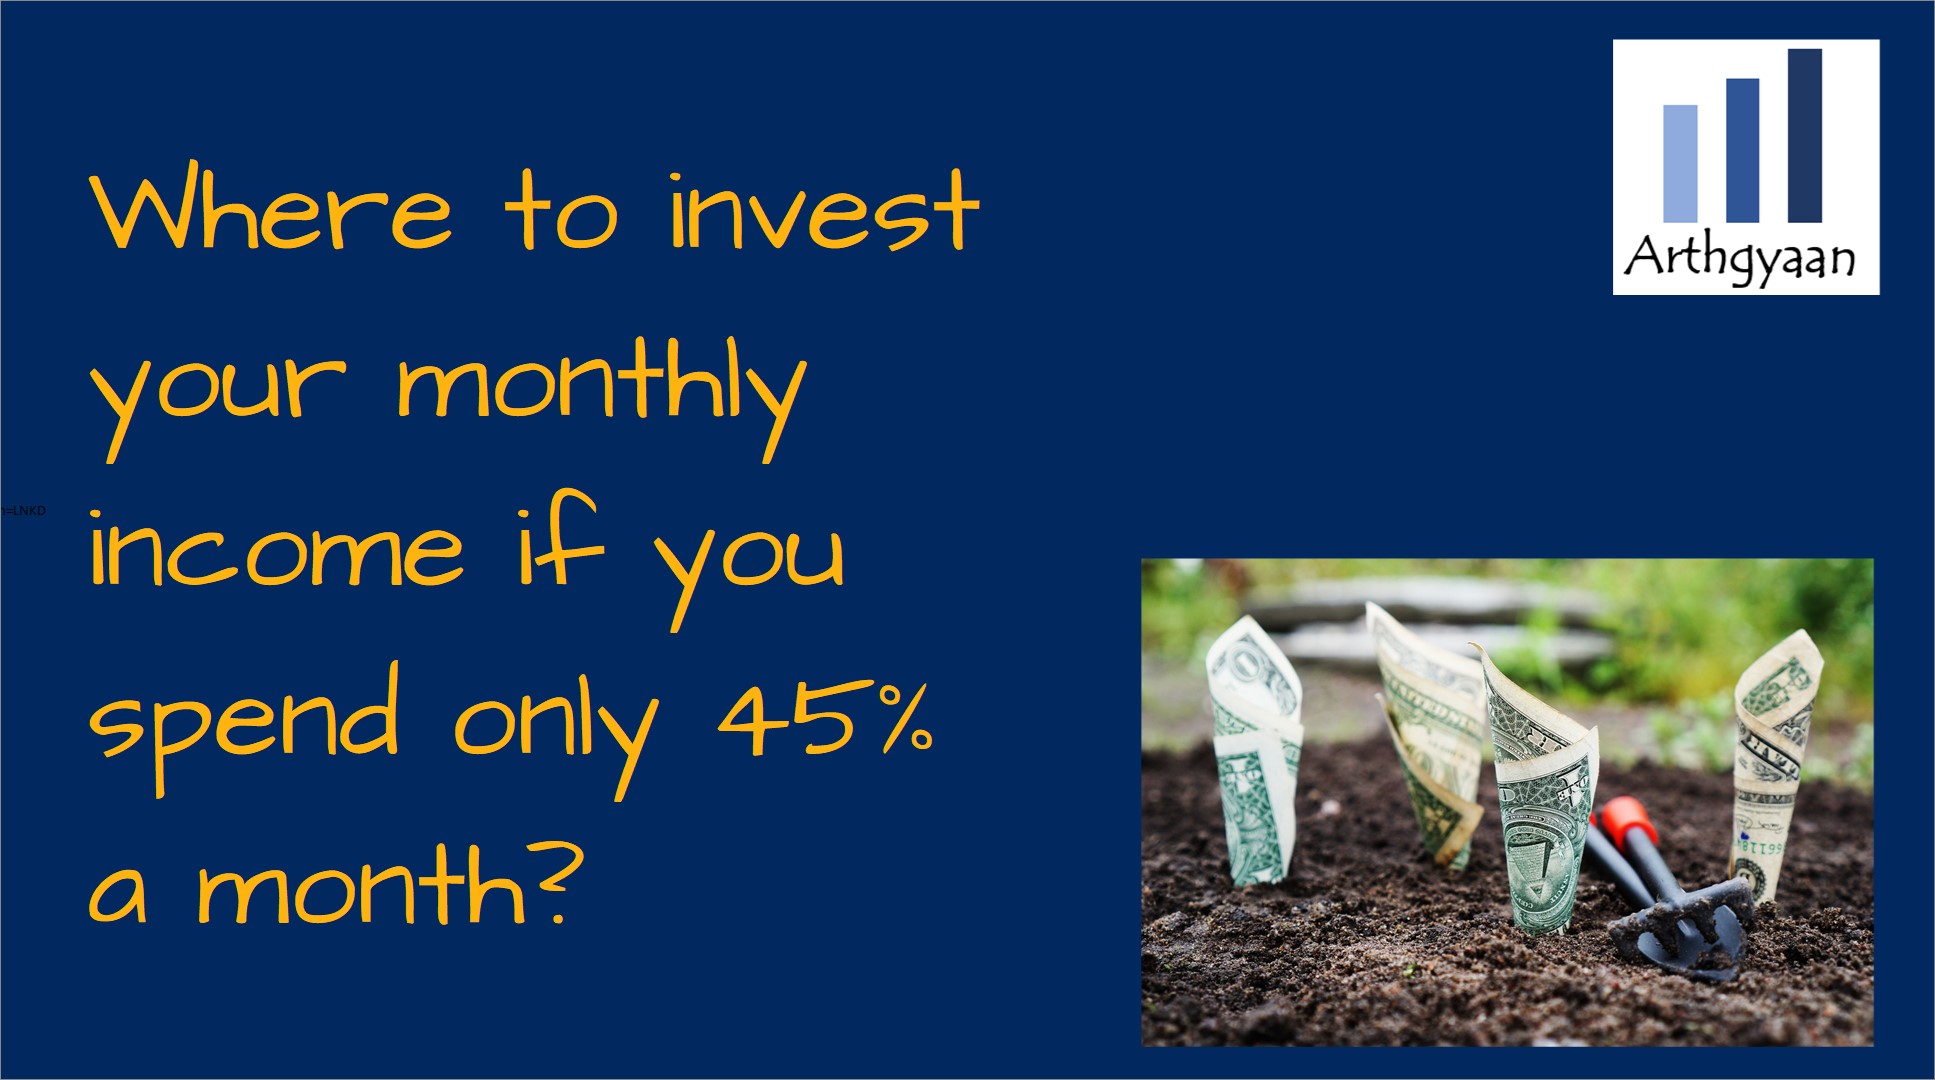 Where to invest your monthly income if you spend only 45% a month?